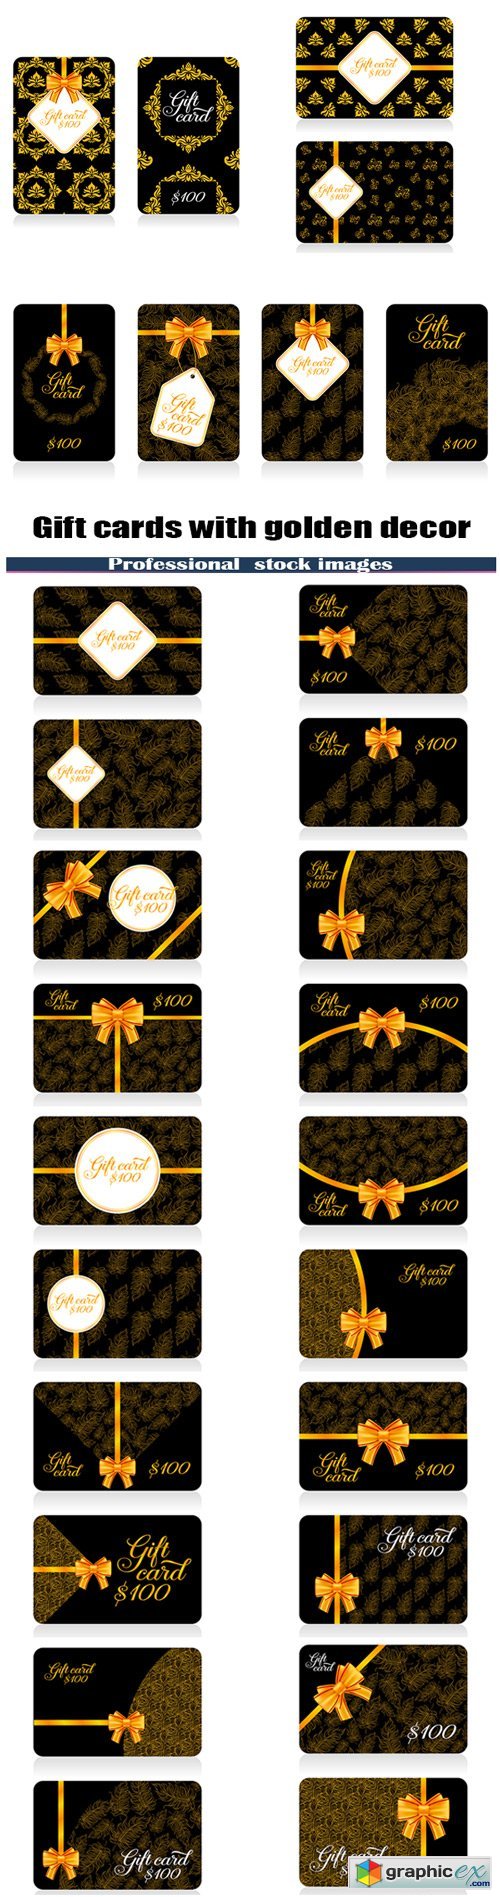 Gift cards with golden decor pattern